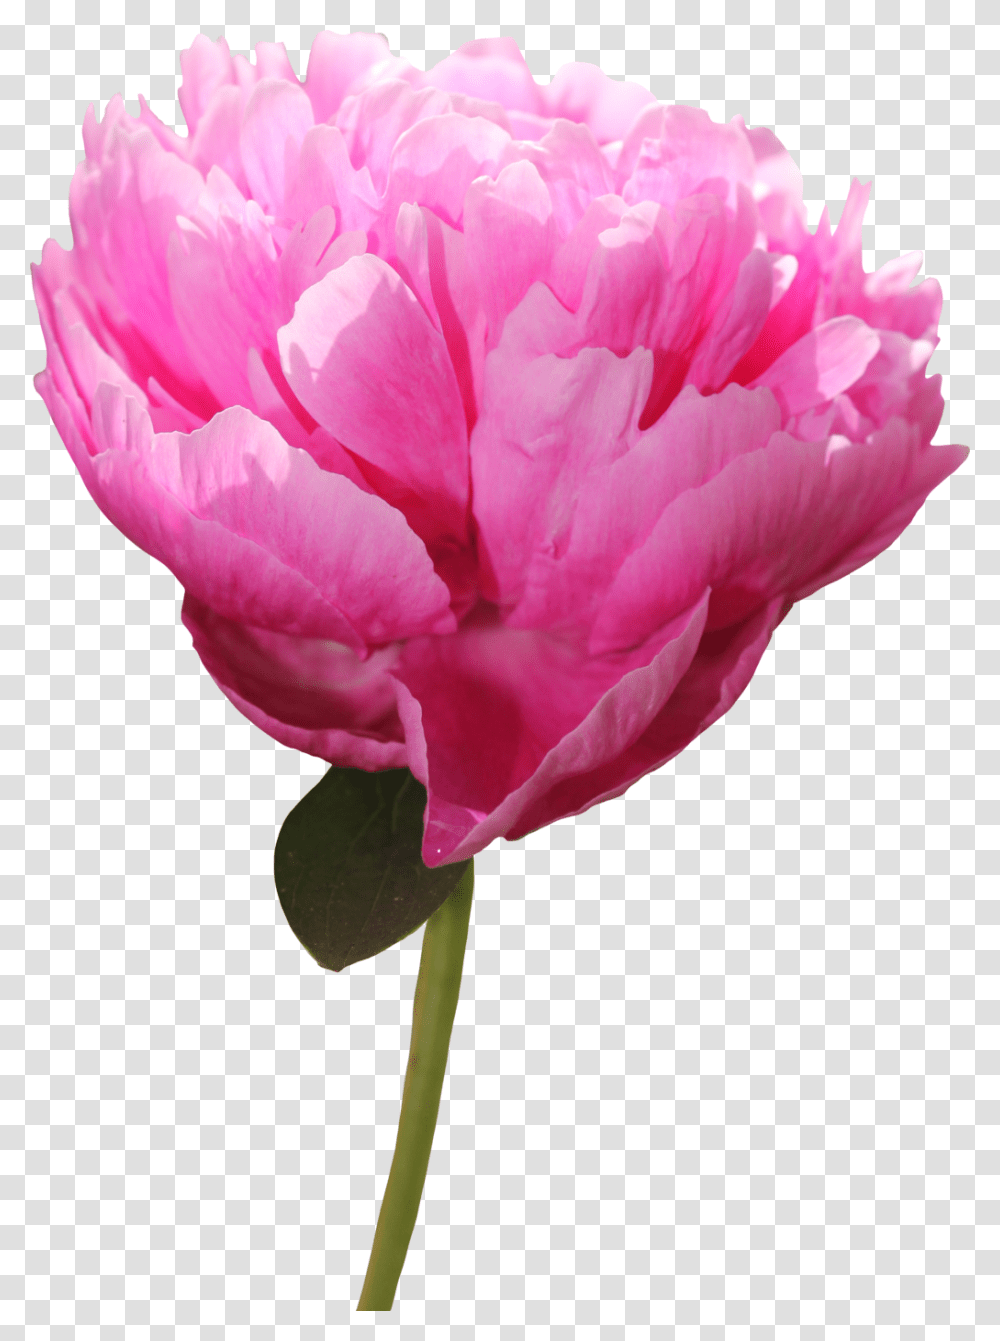 Peony Picture For Designing Purpose Peony, Plant, Flower, Blossom, Carnation Transparent Png